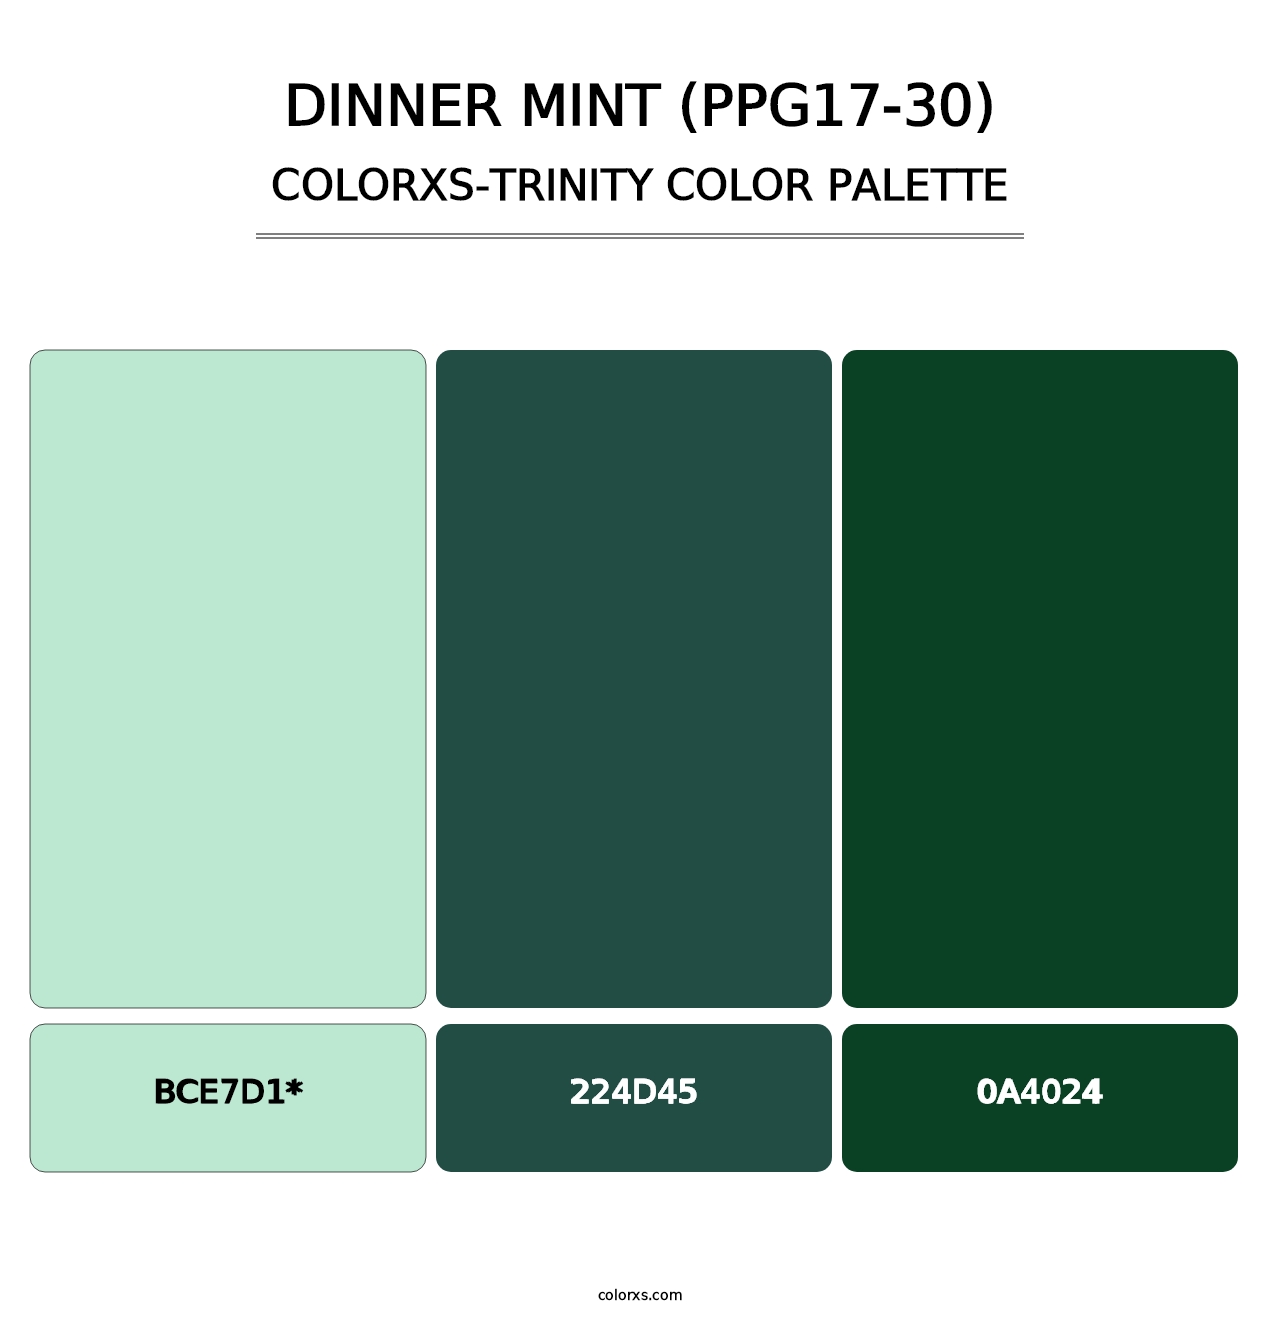 Dinner Mint (PPG17-30) - Colorxs Trinity Palette